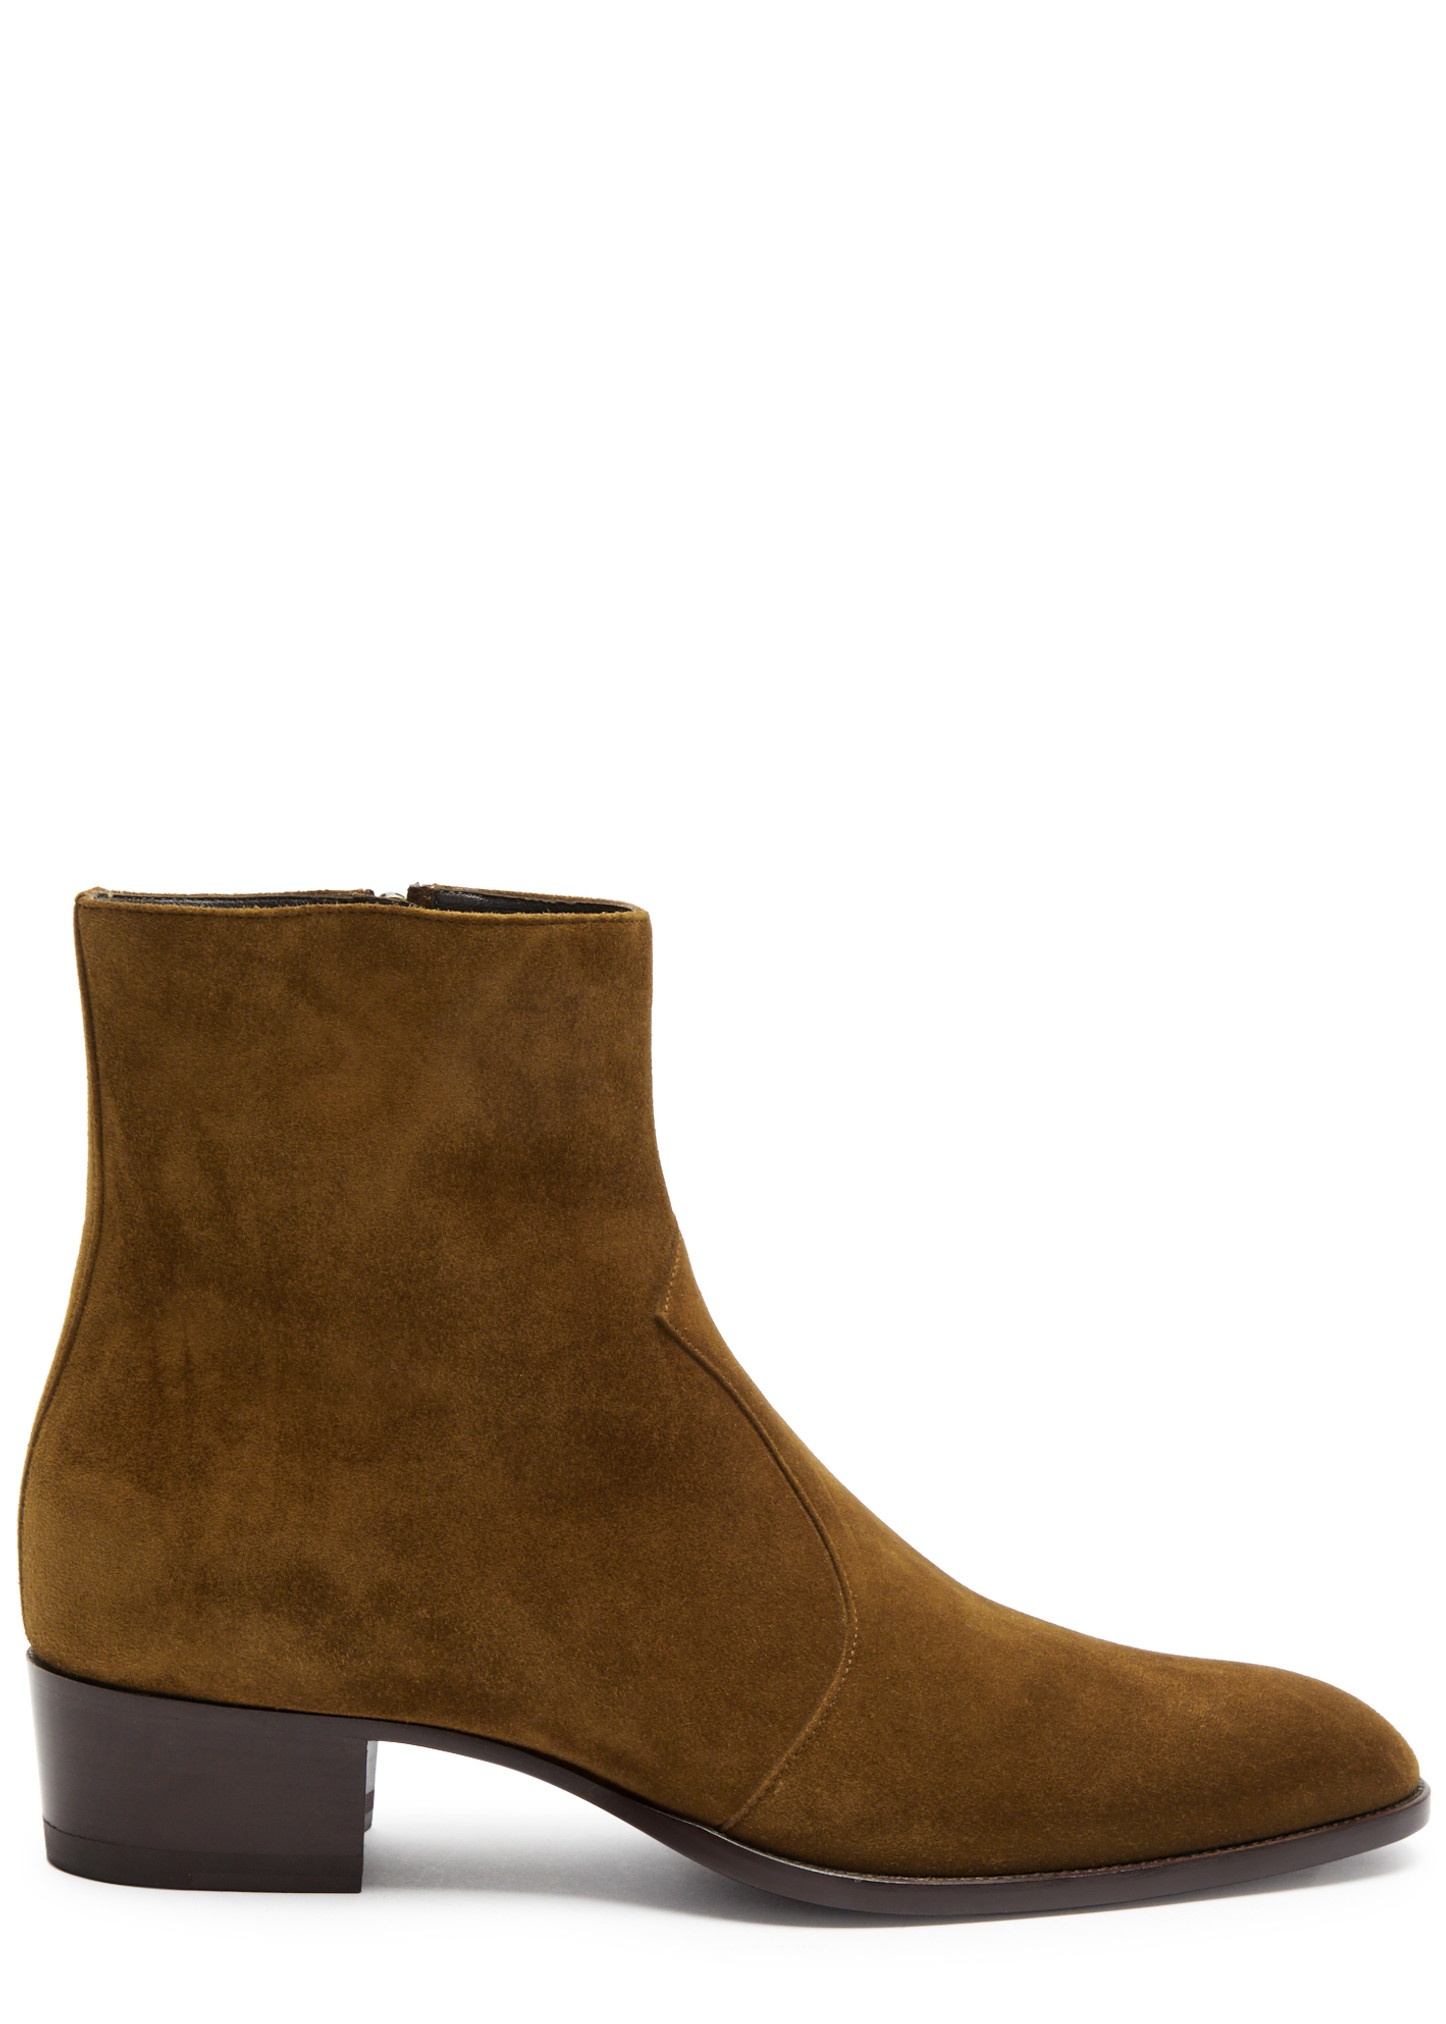 Wyatt 40 suede ankle boots - 1